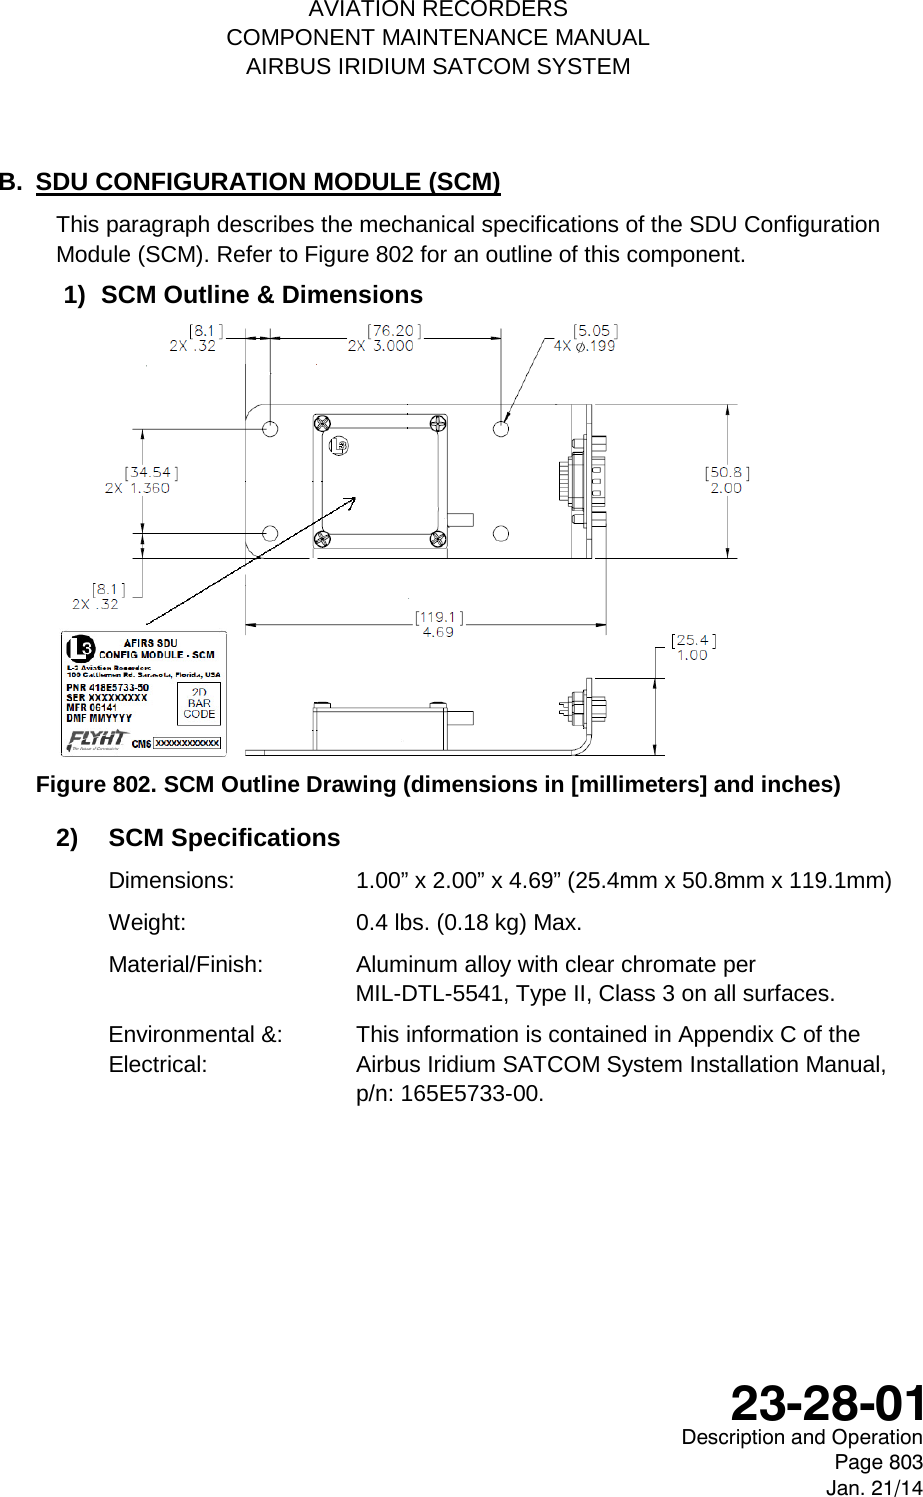    AVIATION RECORDERS COMPONENT MAINTENANCE MANUAL AIRBUS IRIDIUM SATCOM SYSTEM B. SDU CONFIGURATION MODULE (SCM) This paragraph describes the mechanical specifications of the SDU Configuration Module (SCM). Refer to Figure 802 for an outline of this component. 1) SCM Outline &amp; Dimensions  Figure 802. SCM Outline Drawing (dimensions in [millimeters] and inches) 2) SCM Specifications Dimensions:  1.00” x 2.00” x 4.69” (25.4mm x 50.8mm x 119.1mm) Weight:    0.4 lbs. (0.18 kg) Max. Material/Finish:   Aluminum alloy with clear chromate per  MIL-DTL-5541, Type II, Class 3 on all surfaces. Environmental &amp;: This information is contained in Appendix C of the  Electrical: Airbus Iridium SATCOM System Installation Manual, p/n: 165E5733-00.     Description and Operation Page 803 Jan. 21/14  23-28-01 